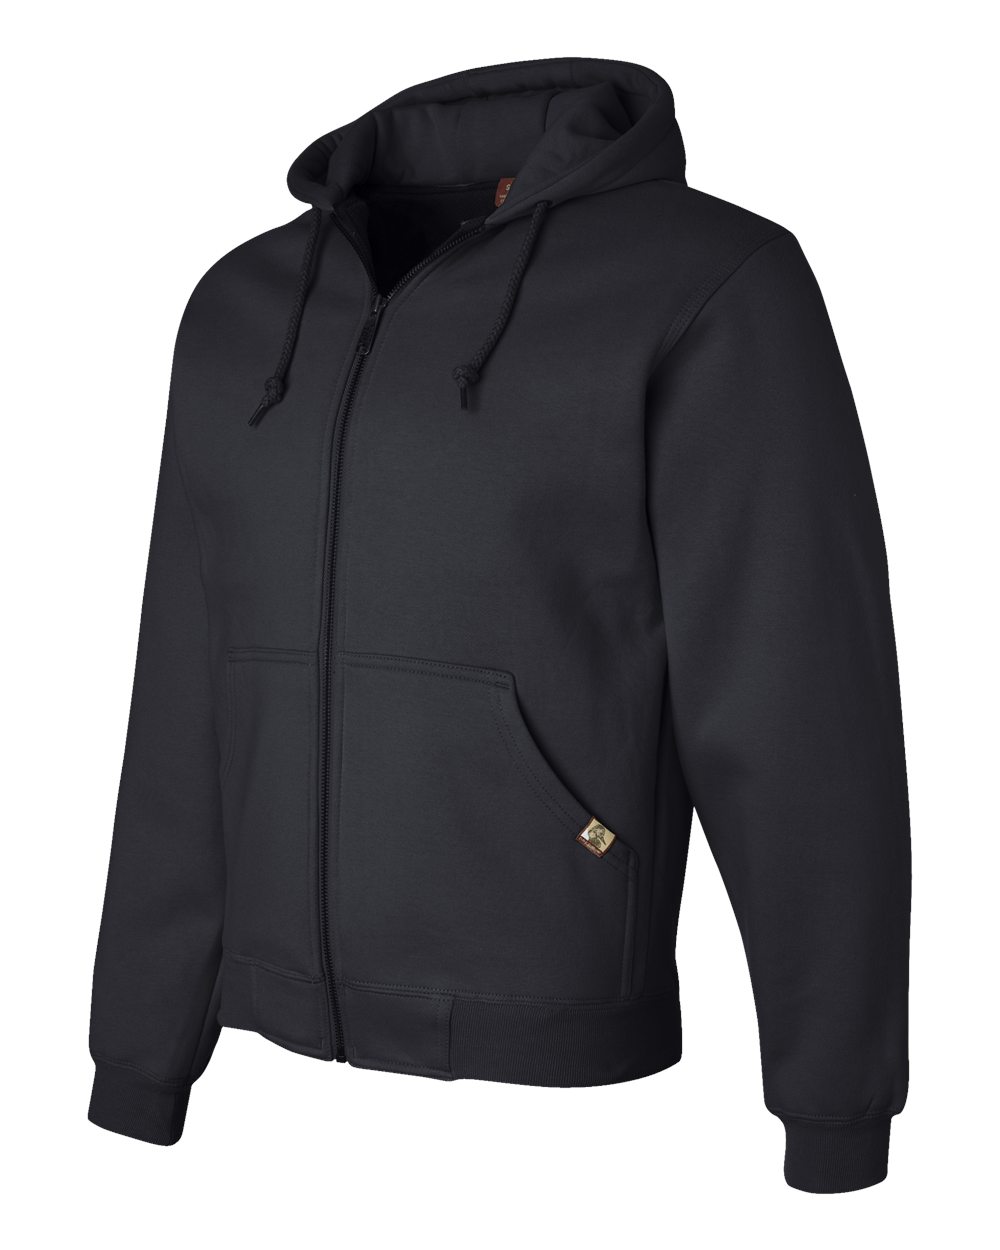 DRI DUCK 7033T - Power Fleece Jacket with Thermal Lining Tall Sizes $85 ...